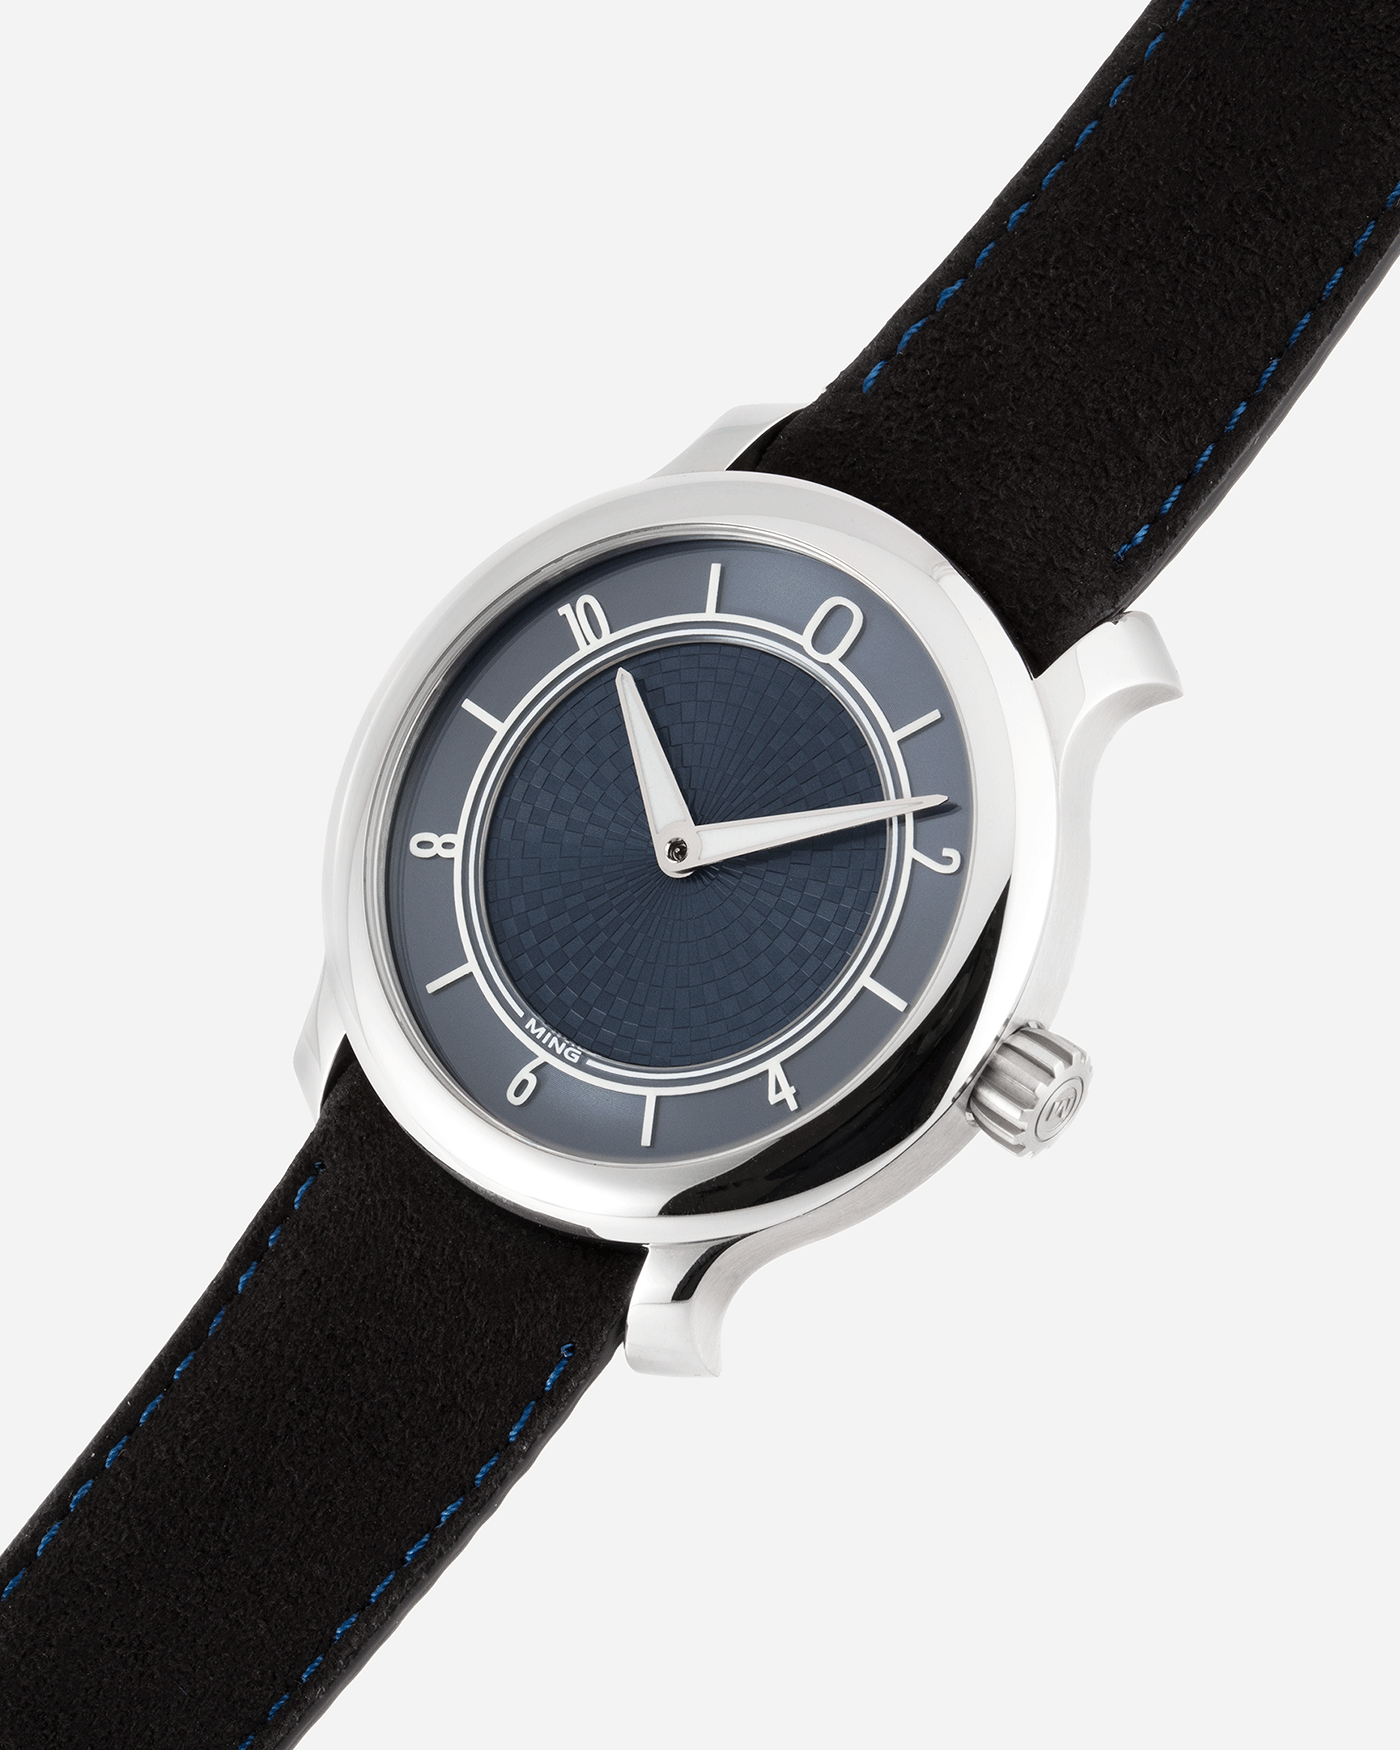 Brand: Ming Year: 2019 Model: 17.06 Material: Stainless Steel Movement: Heavily Modified ETA 2824-2 Case Diameter: 38mm Strap: Jean Rousseau Black Suede with Blue Stitching for MING